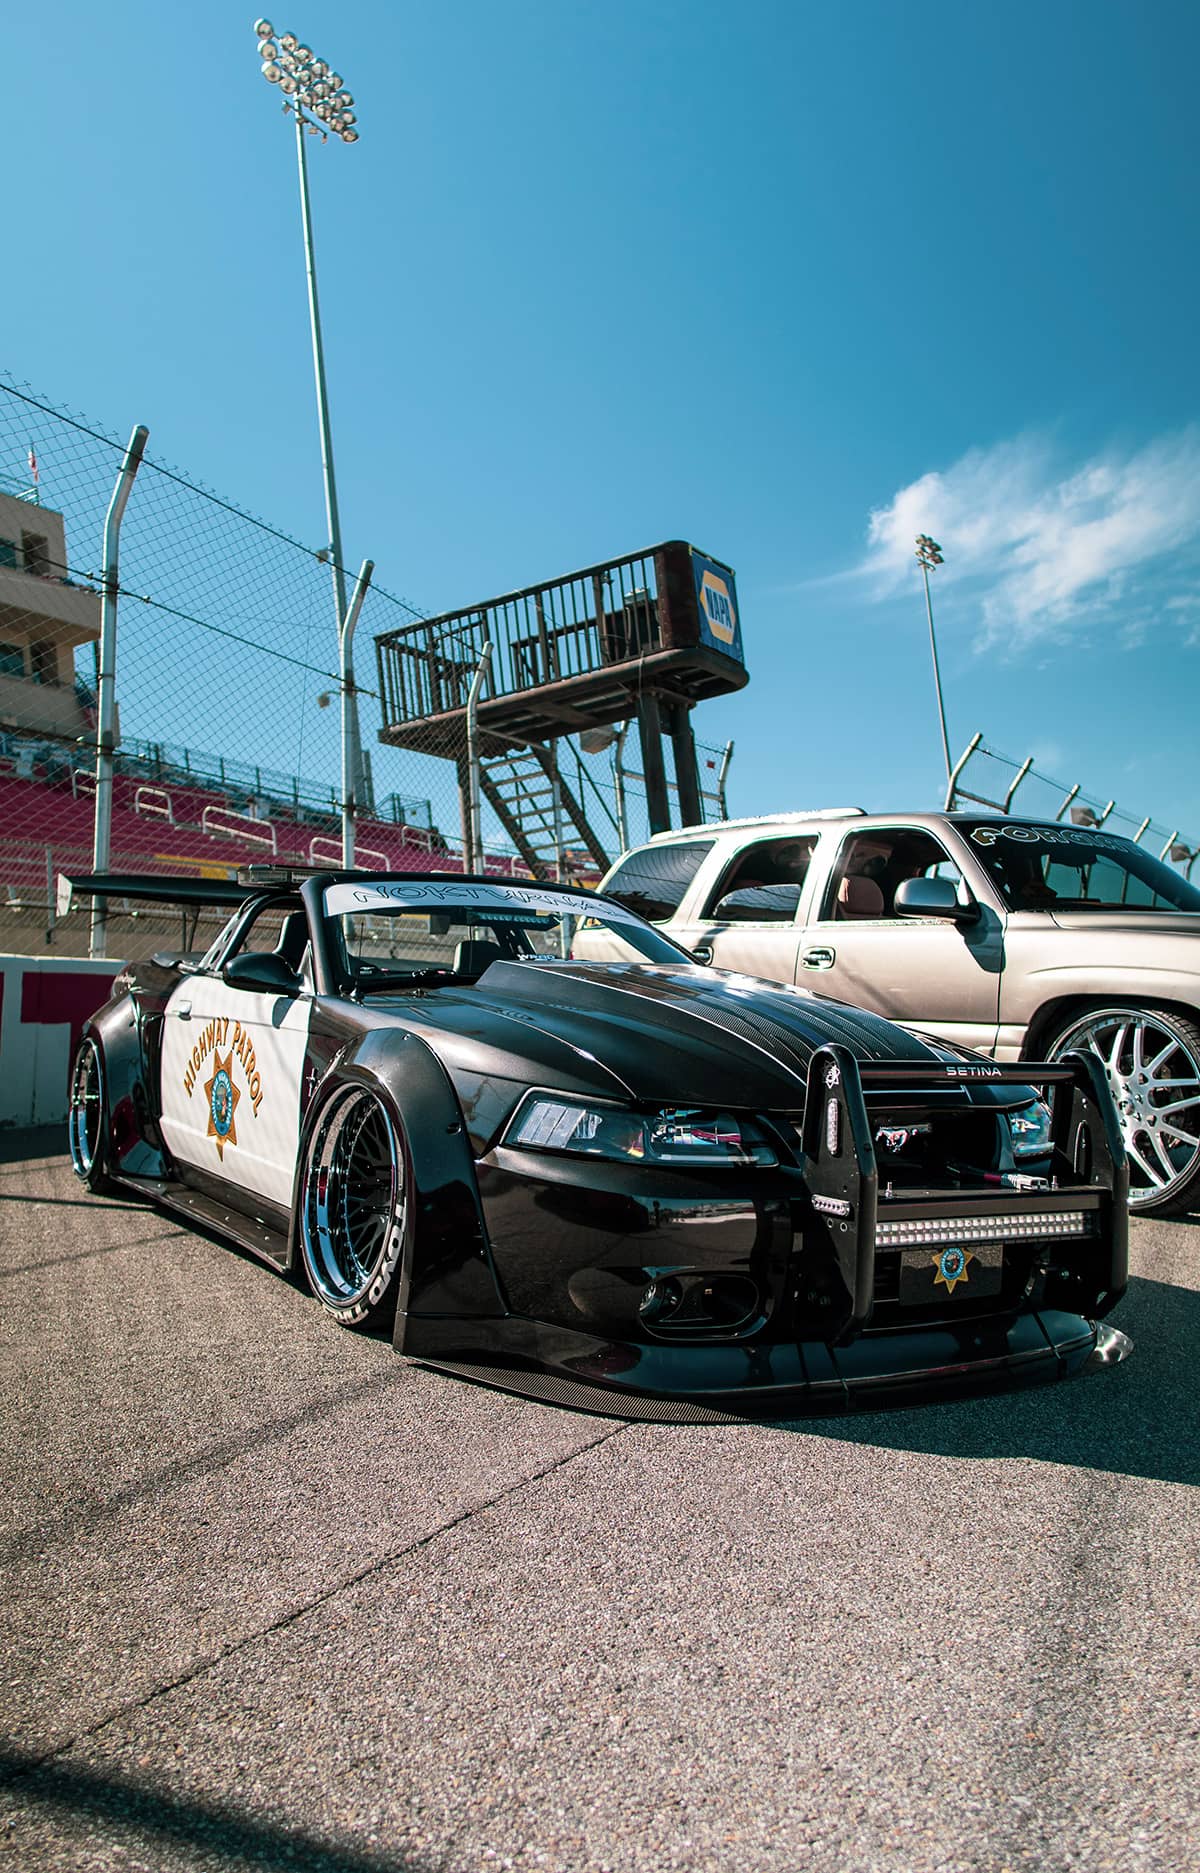 Wide Body Ford Mustang GT Convertible With Police push bar